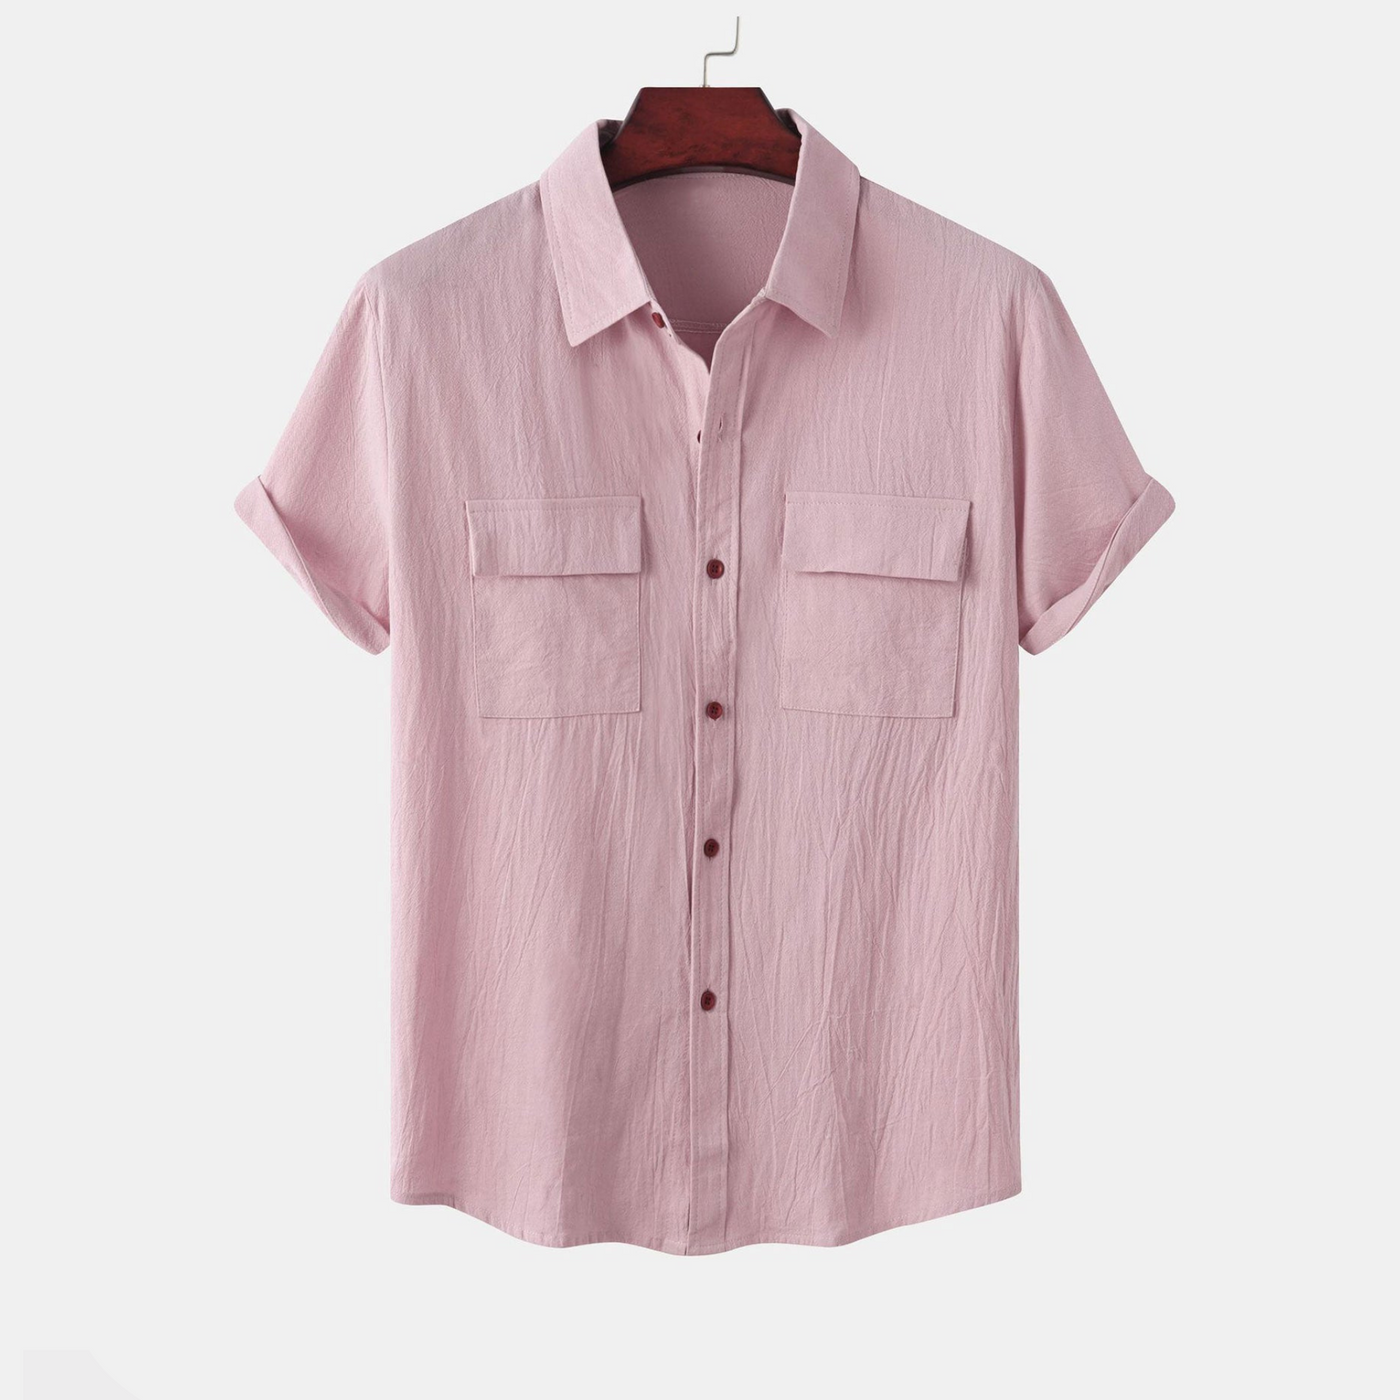 Men's Button-Up Shirt with Patch Pockets